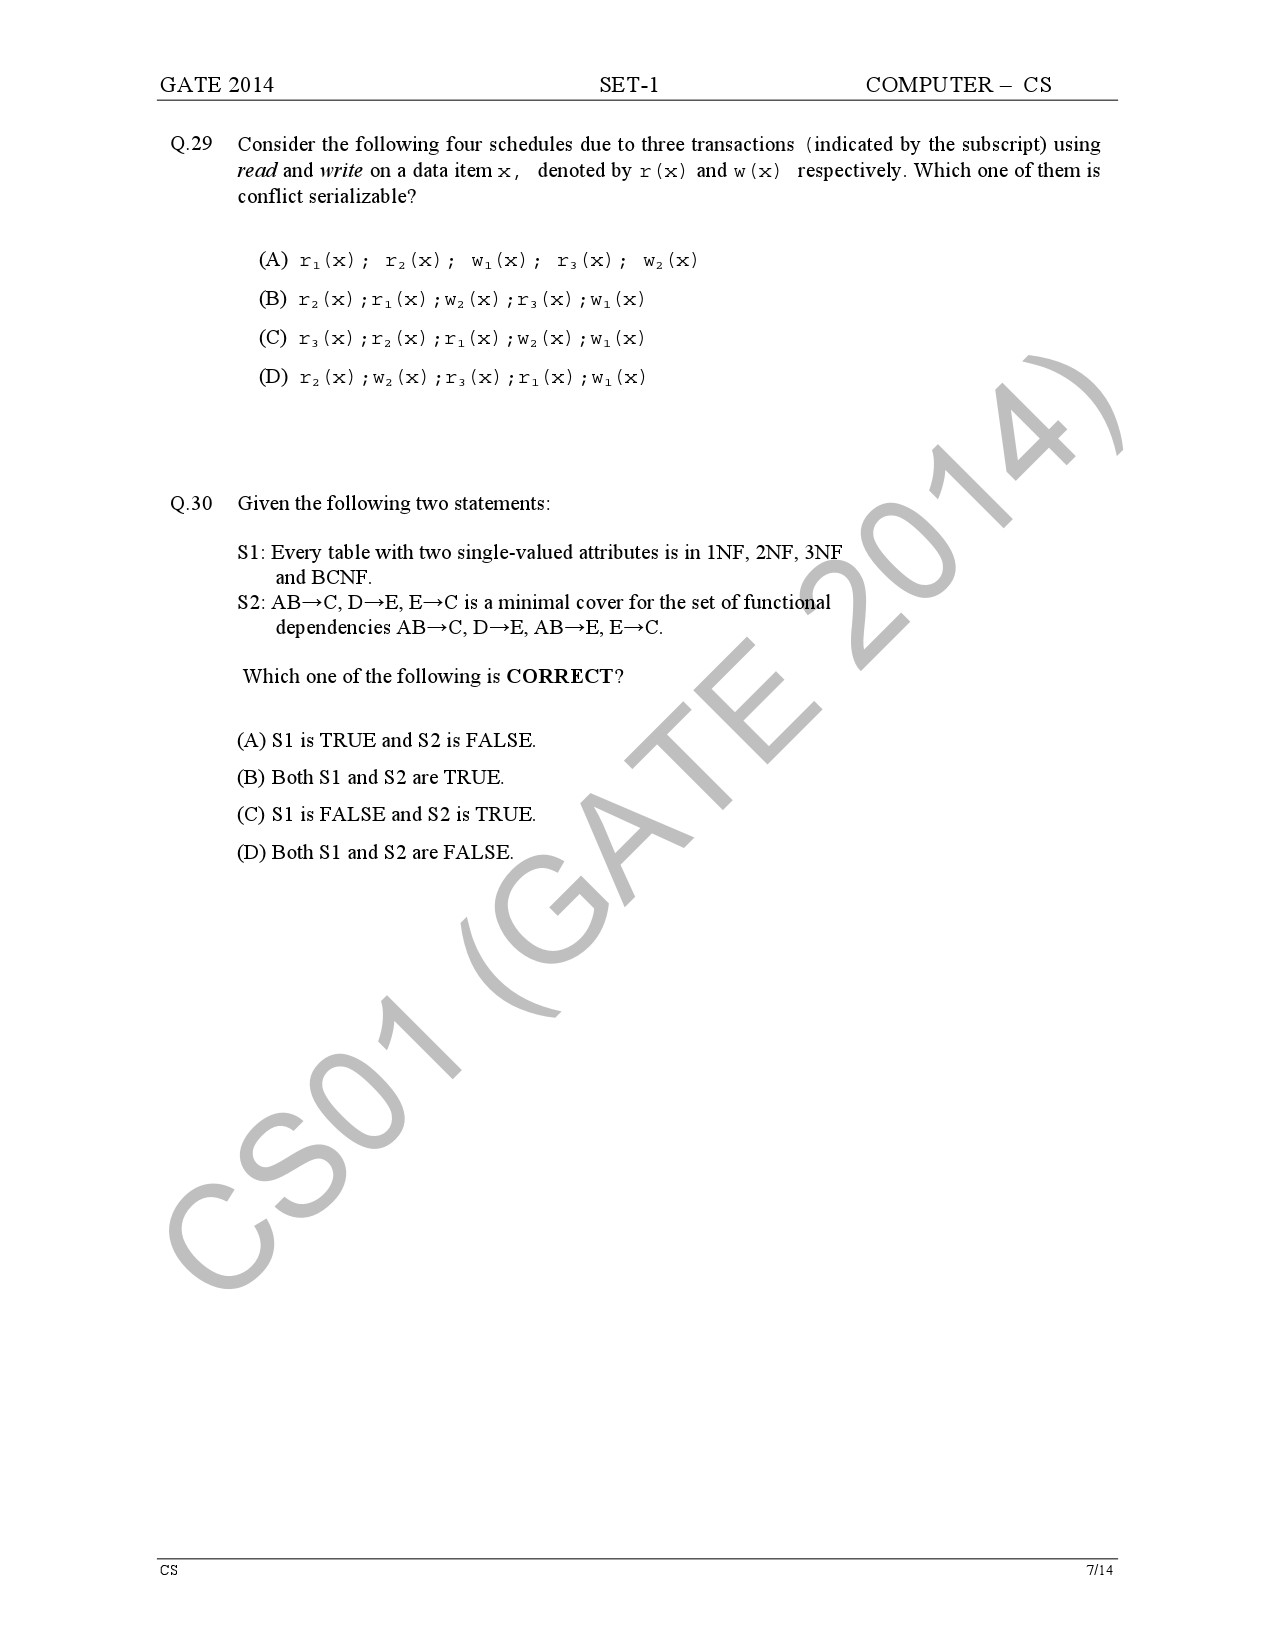 GATE Exam Question Paper 2014 Computer Science and Information Technology Set 1 13